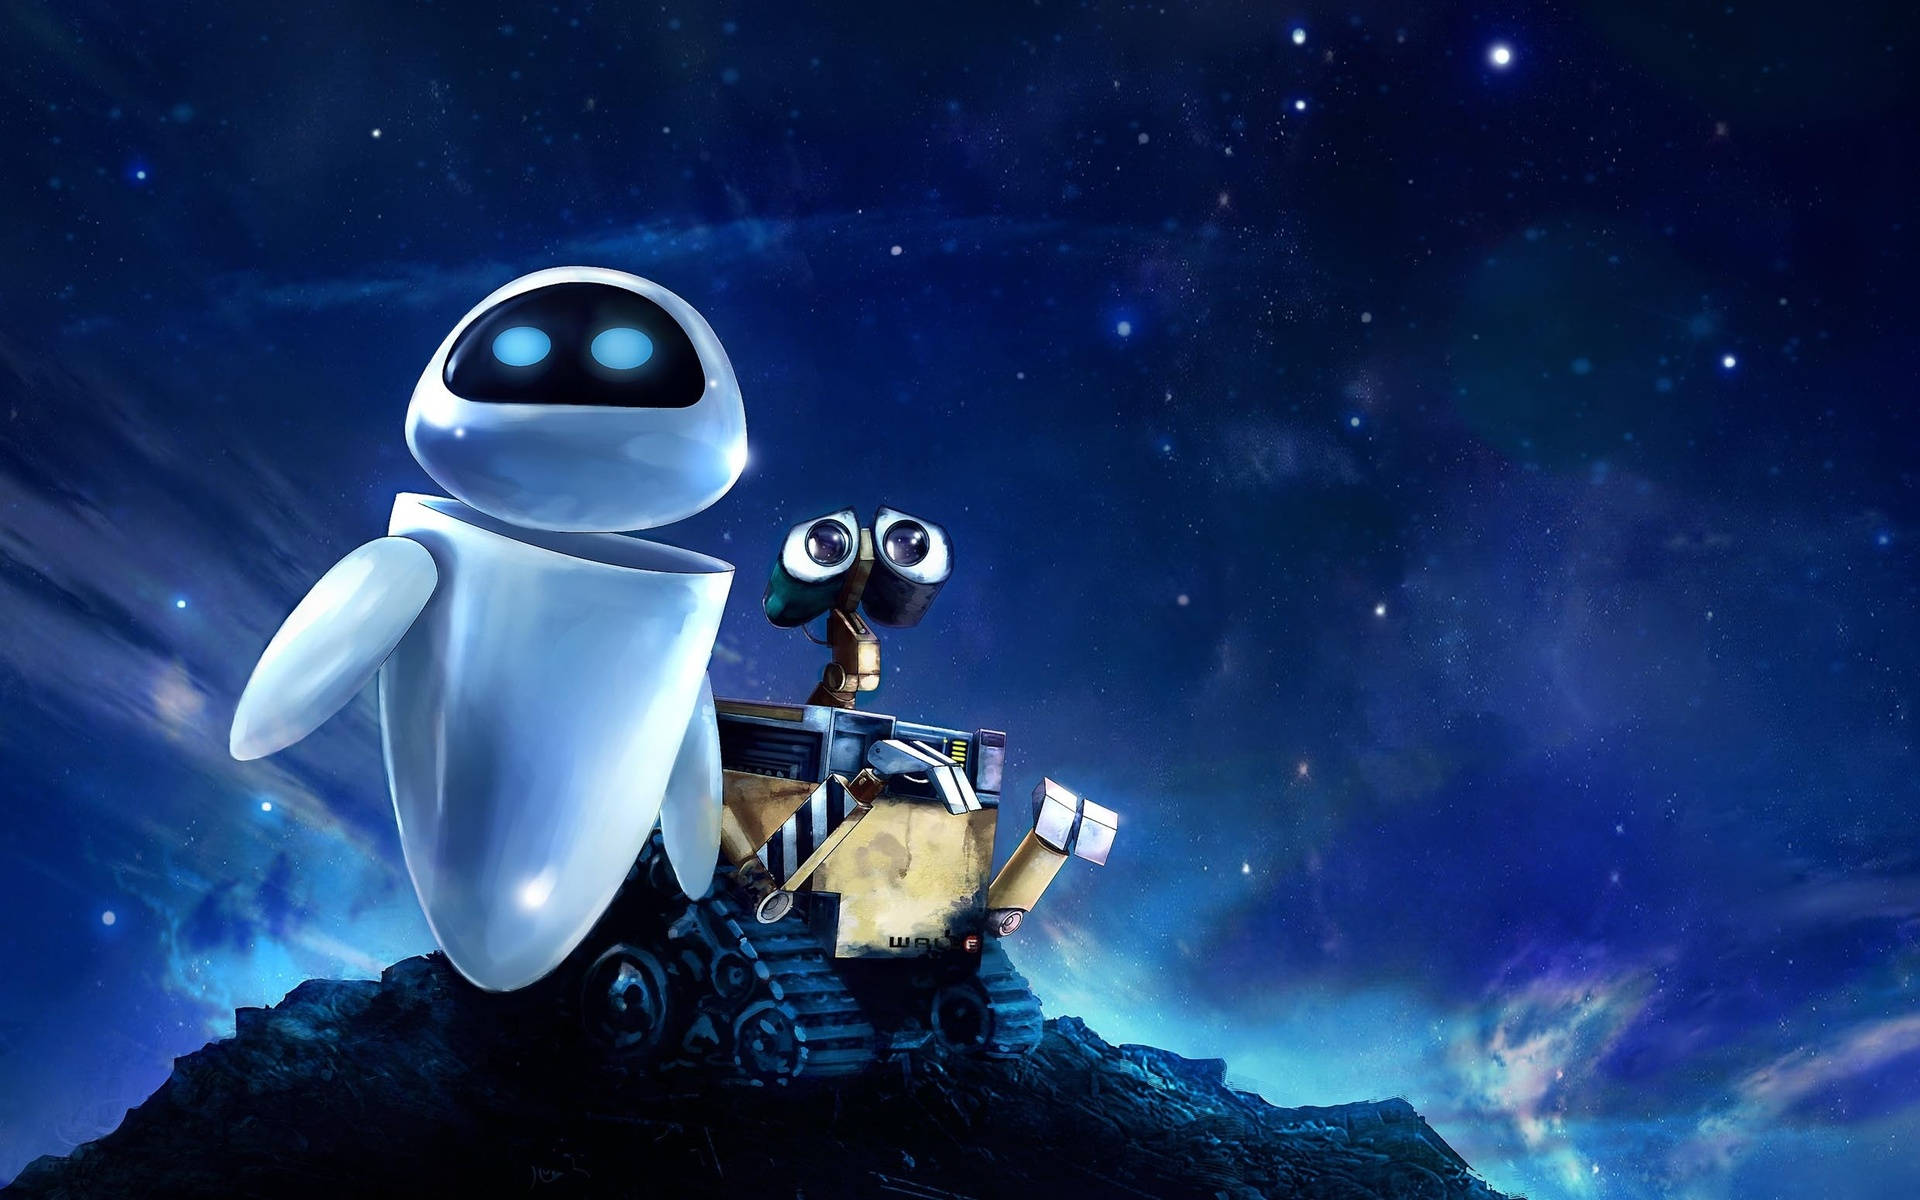 Free Wall E Wallpaper Downloads, [100+] Wall E Wallpapers for FREE |  